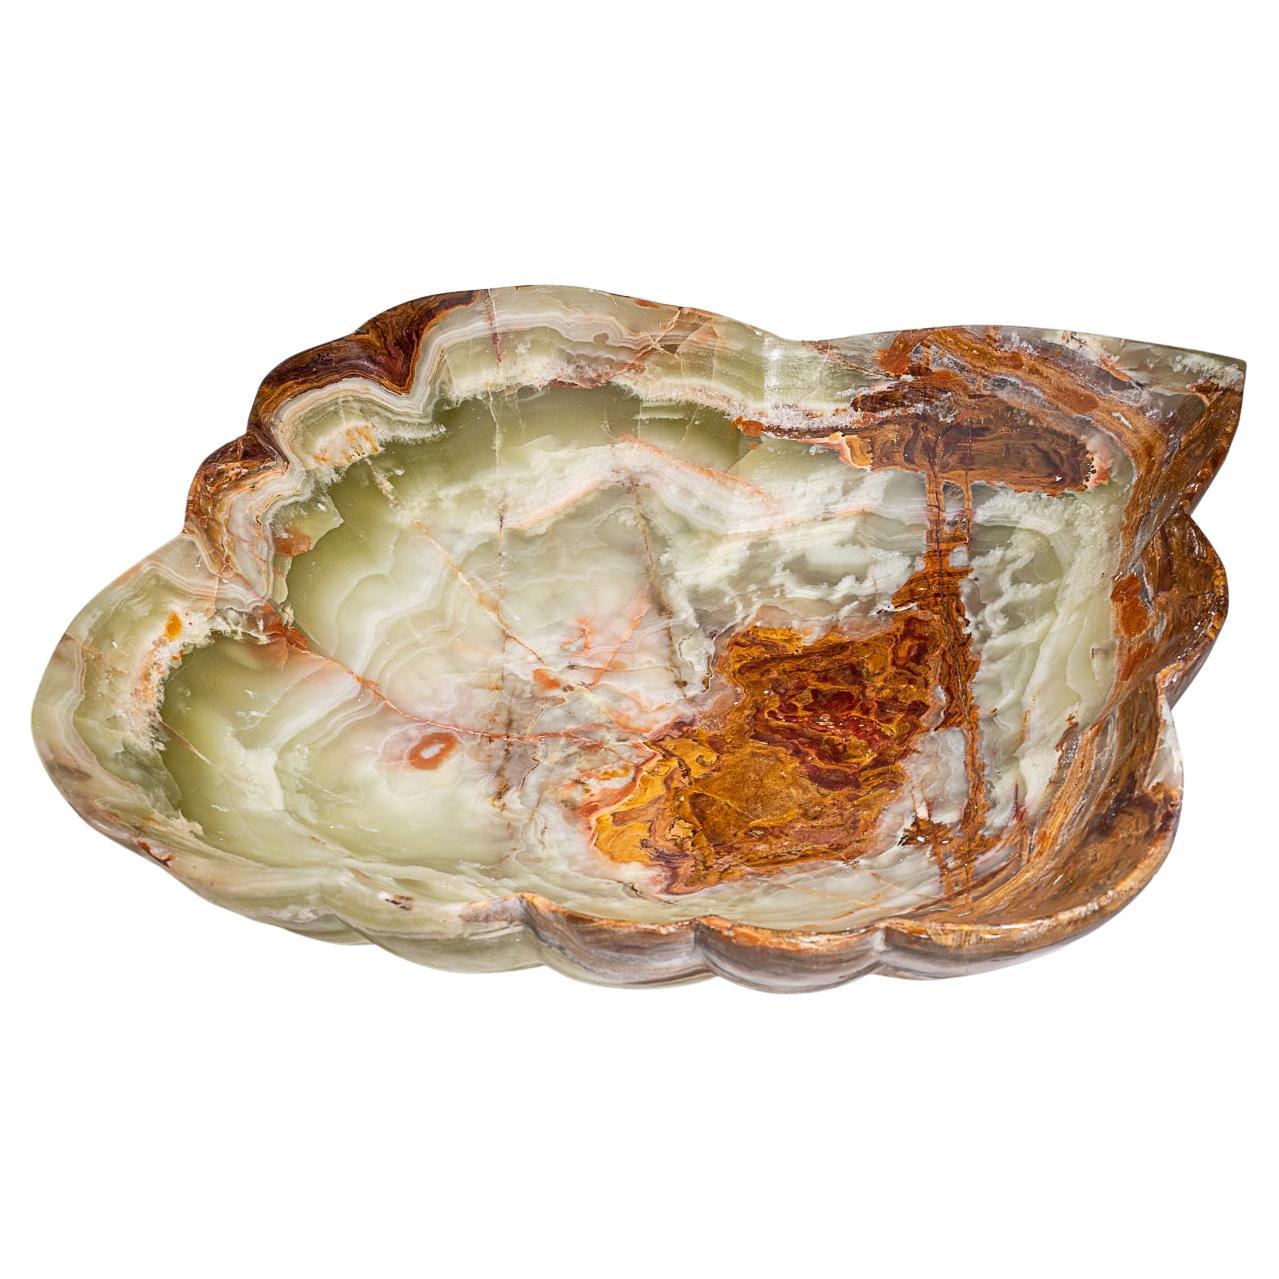 Large Polished Green Onyx Decorative Bowl from Mexico (15" x 15" x 4", 21.6 Lbs) For Sale